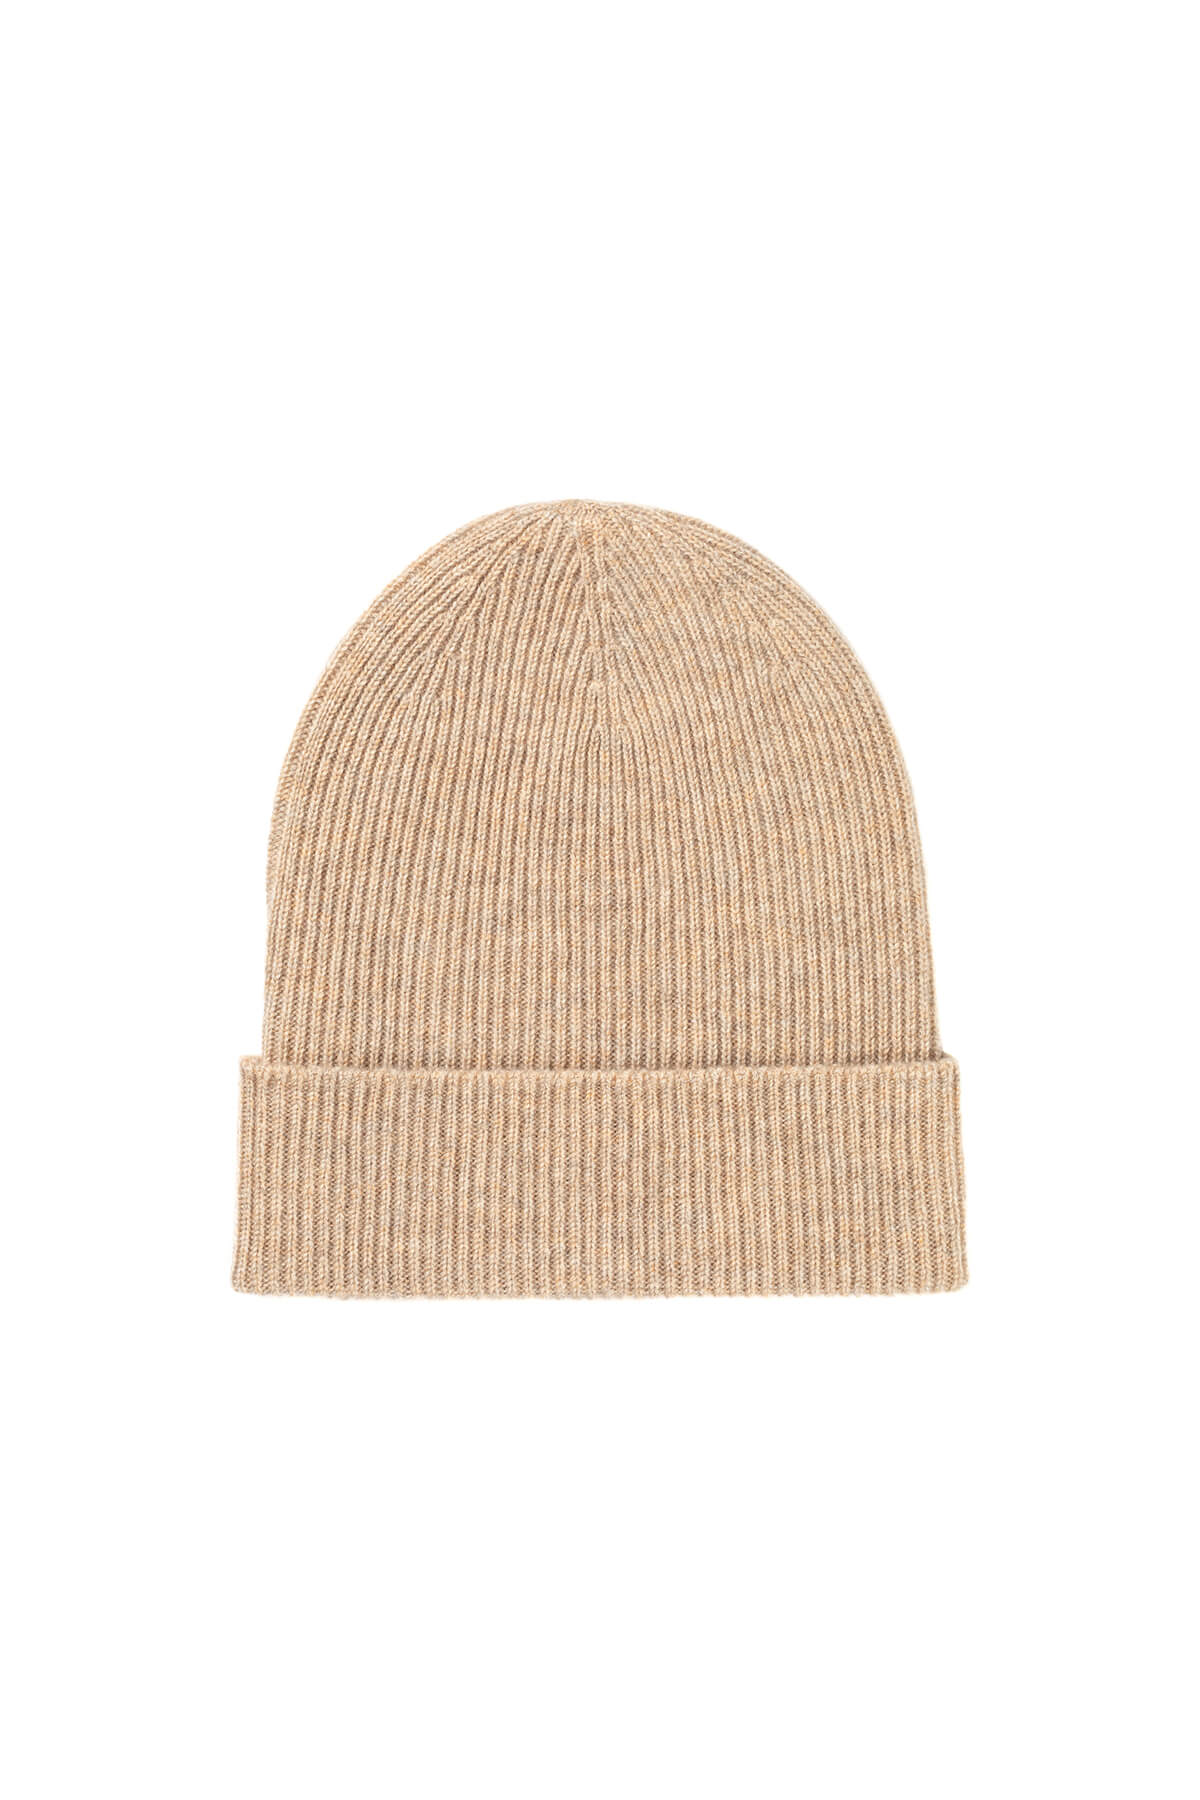 Johnstons of Elgin’s Oatmeal Slouchy Ribbed Cashmere Beanie on white background HAE03325HB0210